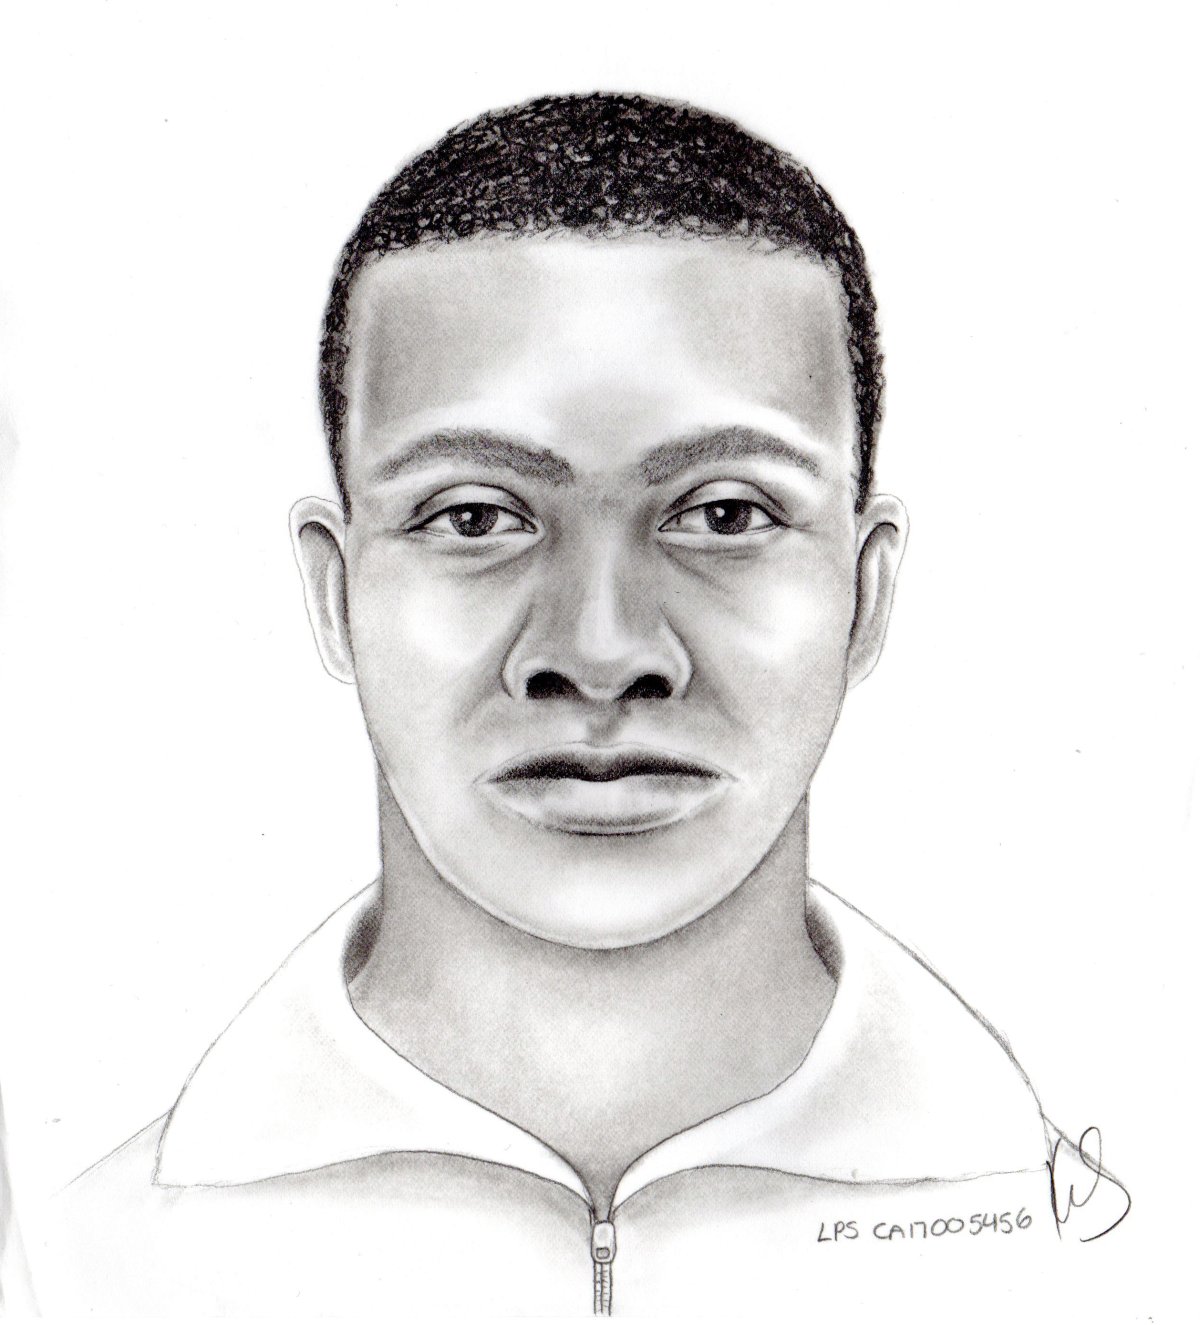 Do you recognize this man? Composite sketch released by Lethbridge police in connection with an attempted sexual assault investigation.